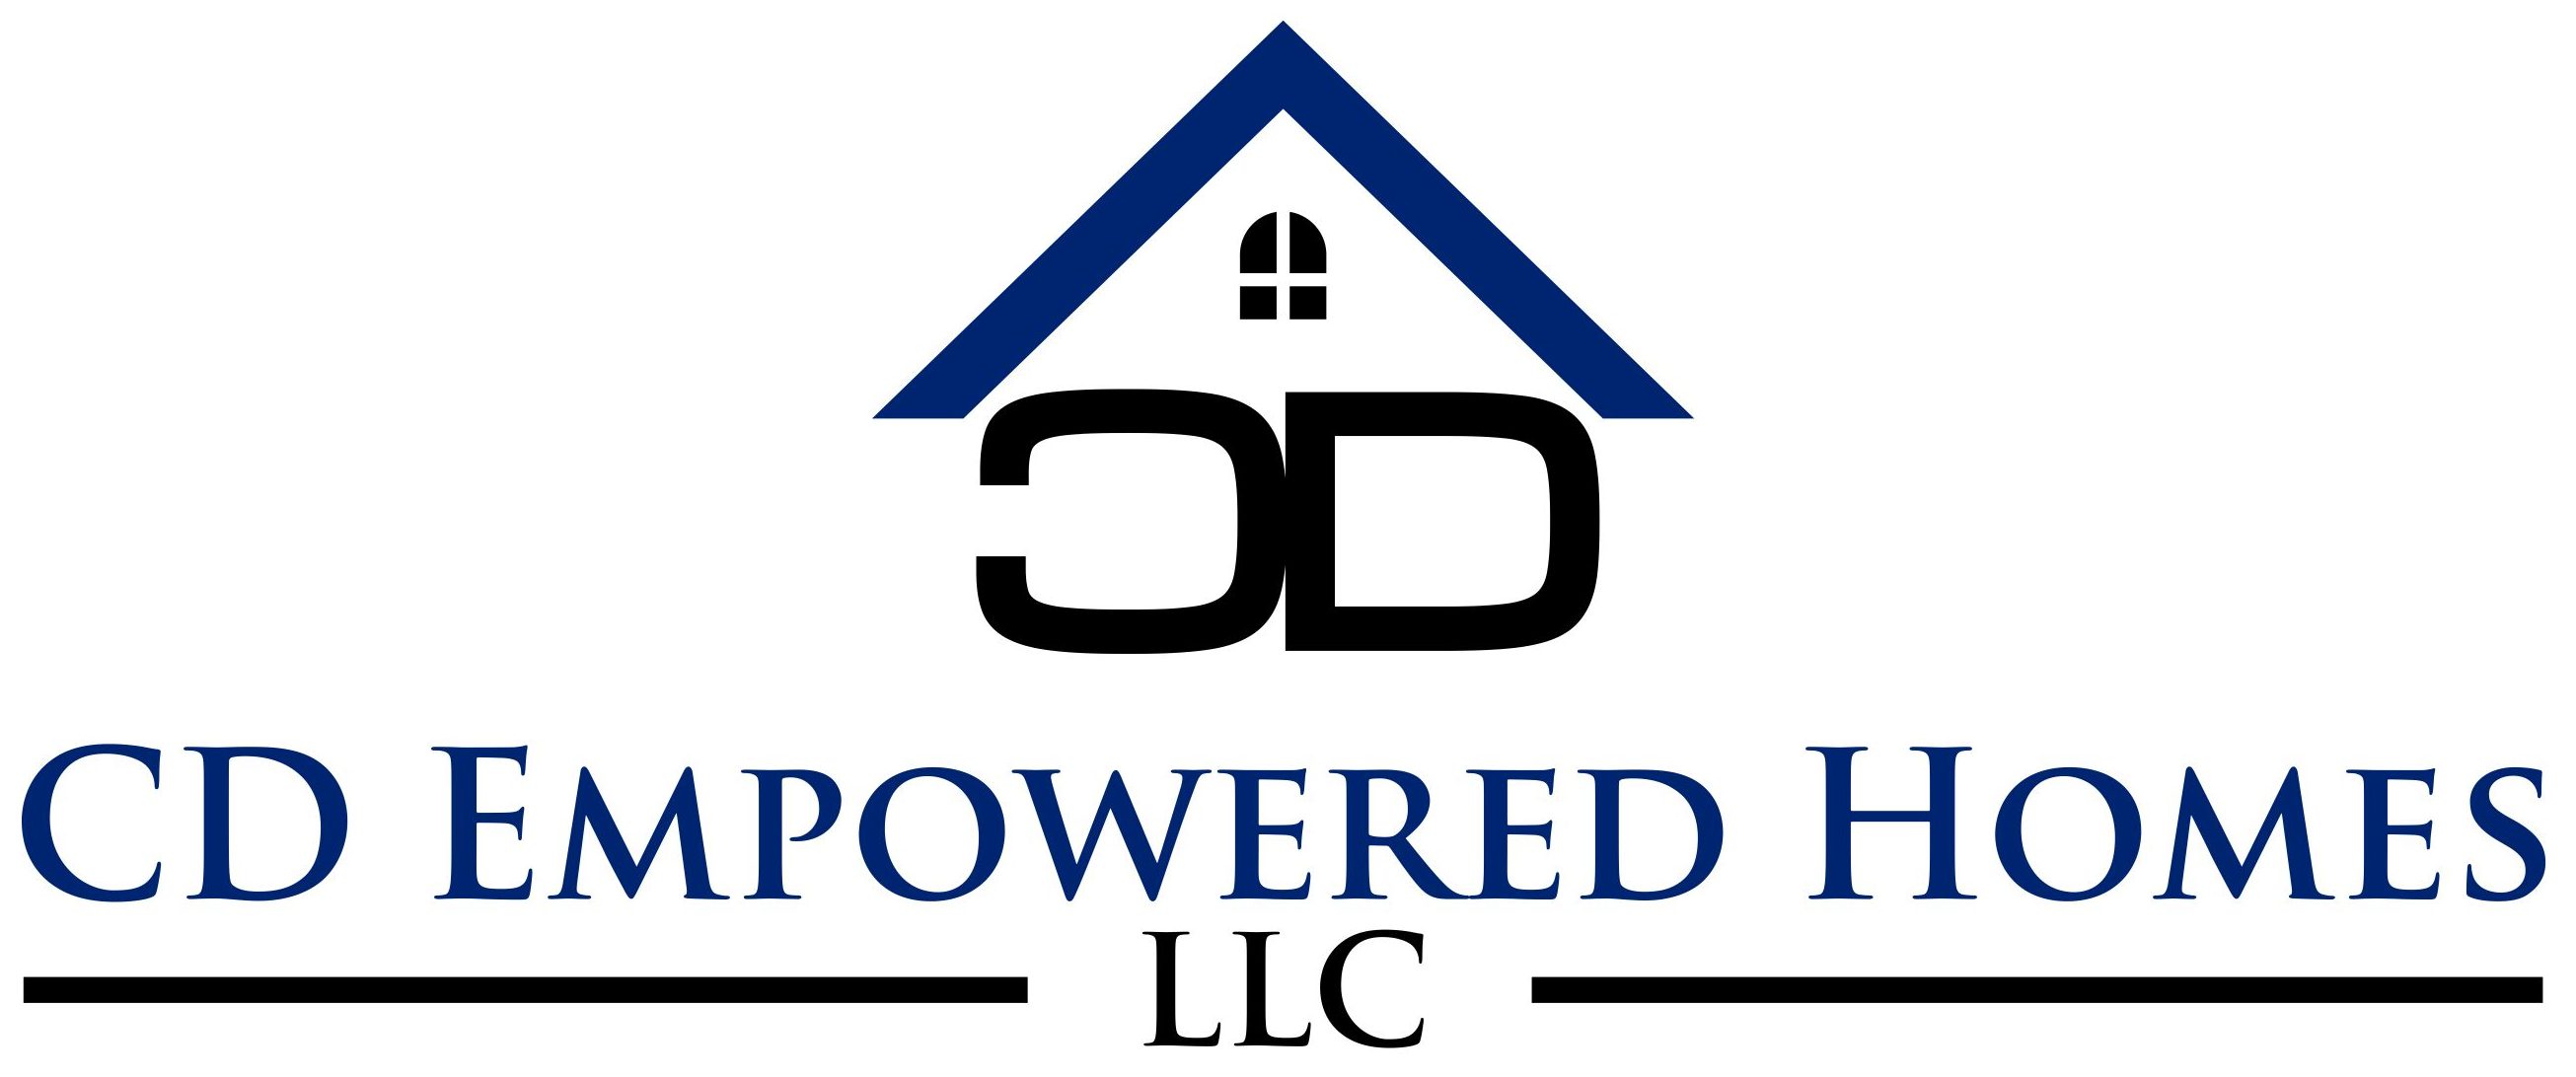 CD Empowered Homes, LLC | Houston, TX's Premier Real Estate Solutions Company